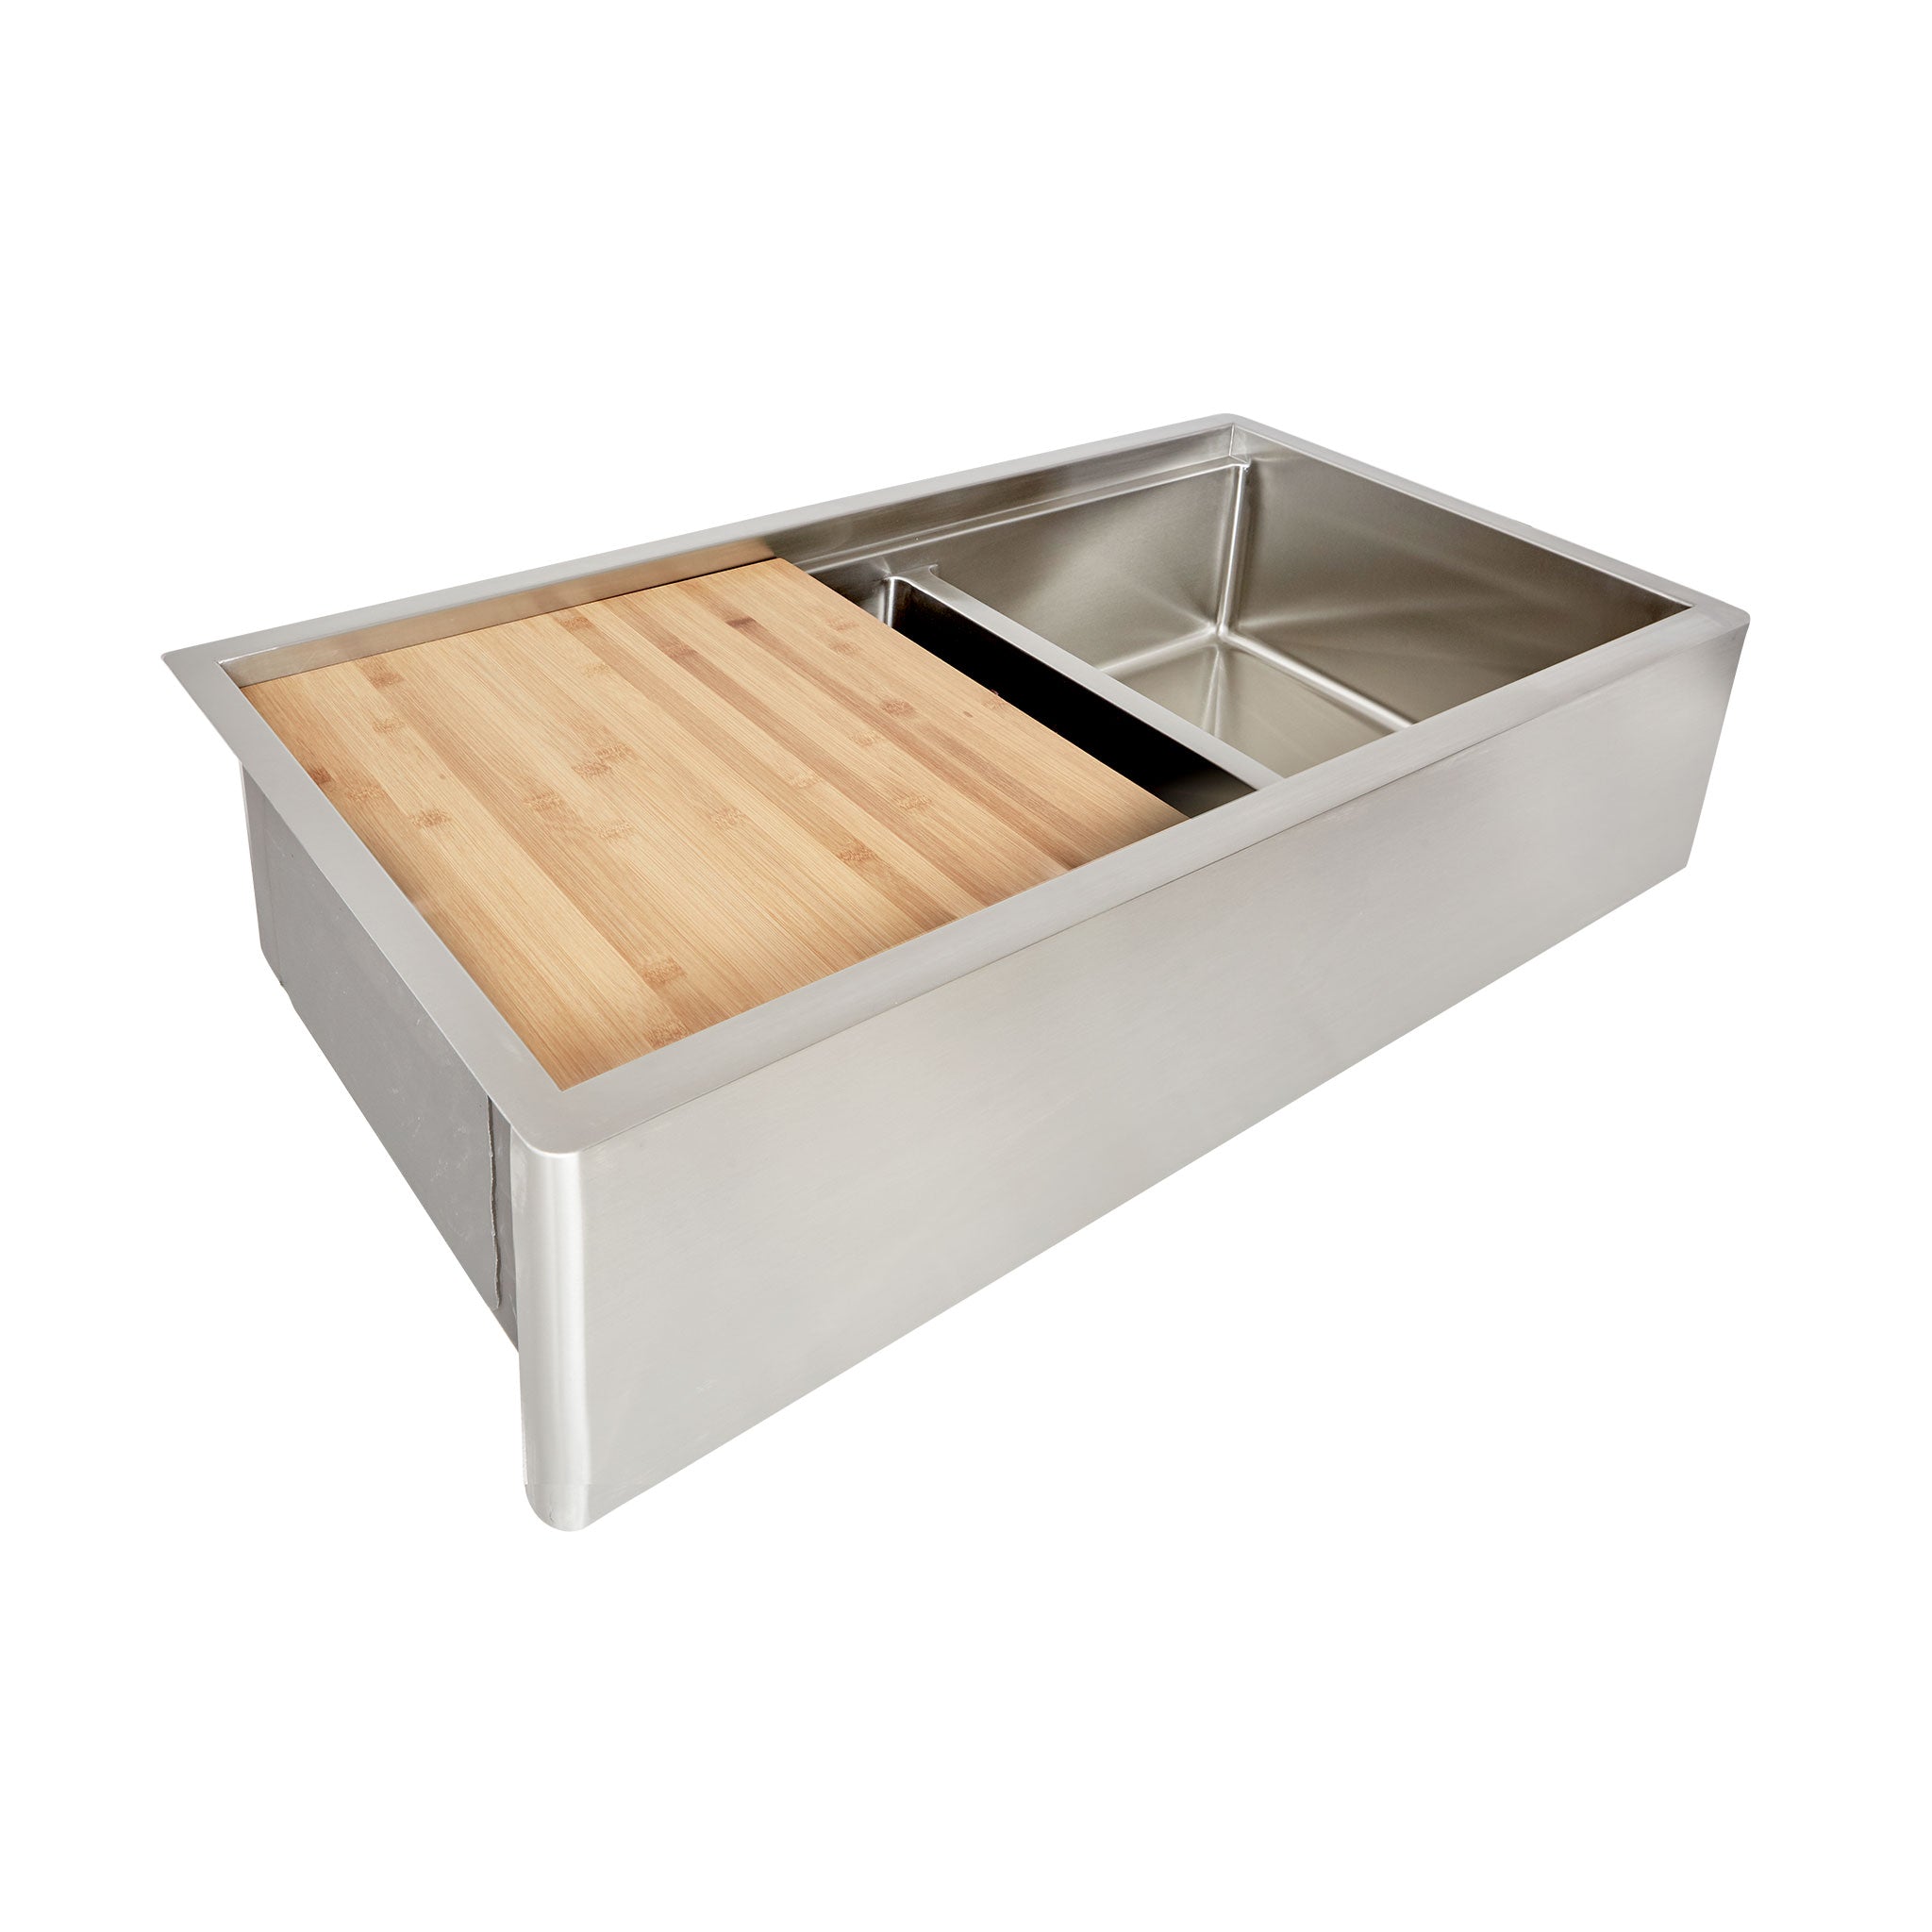 Farmhouse 36 inch kitchen sink with two bowls and seamless undermount drain